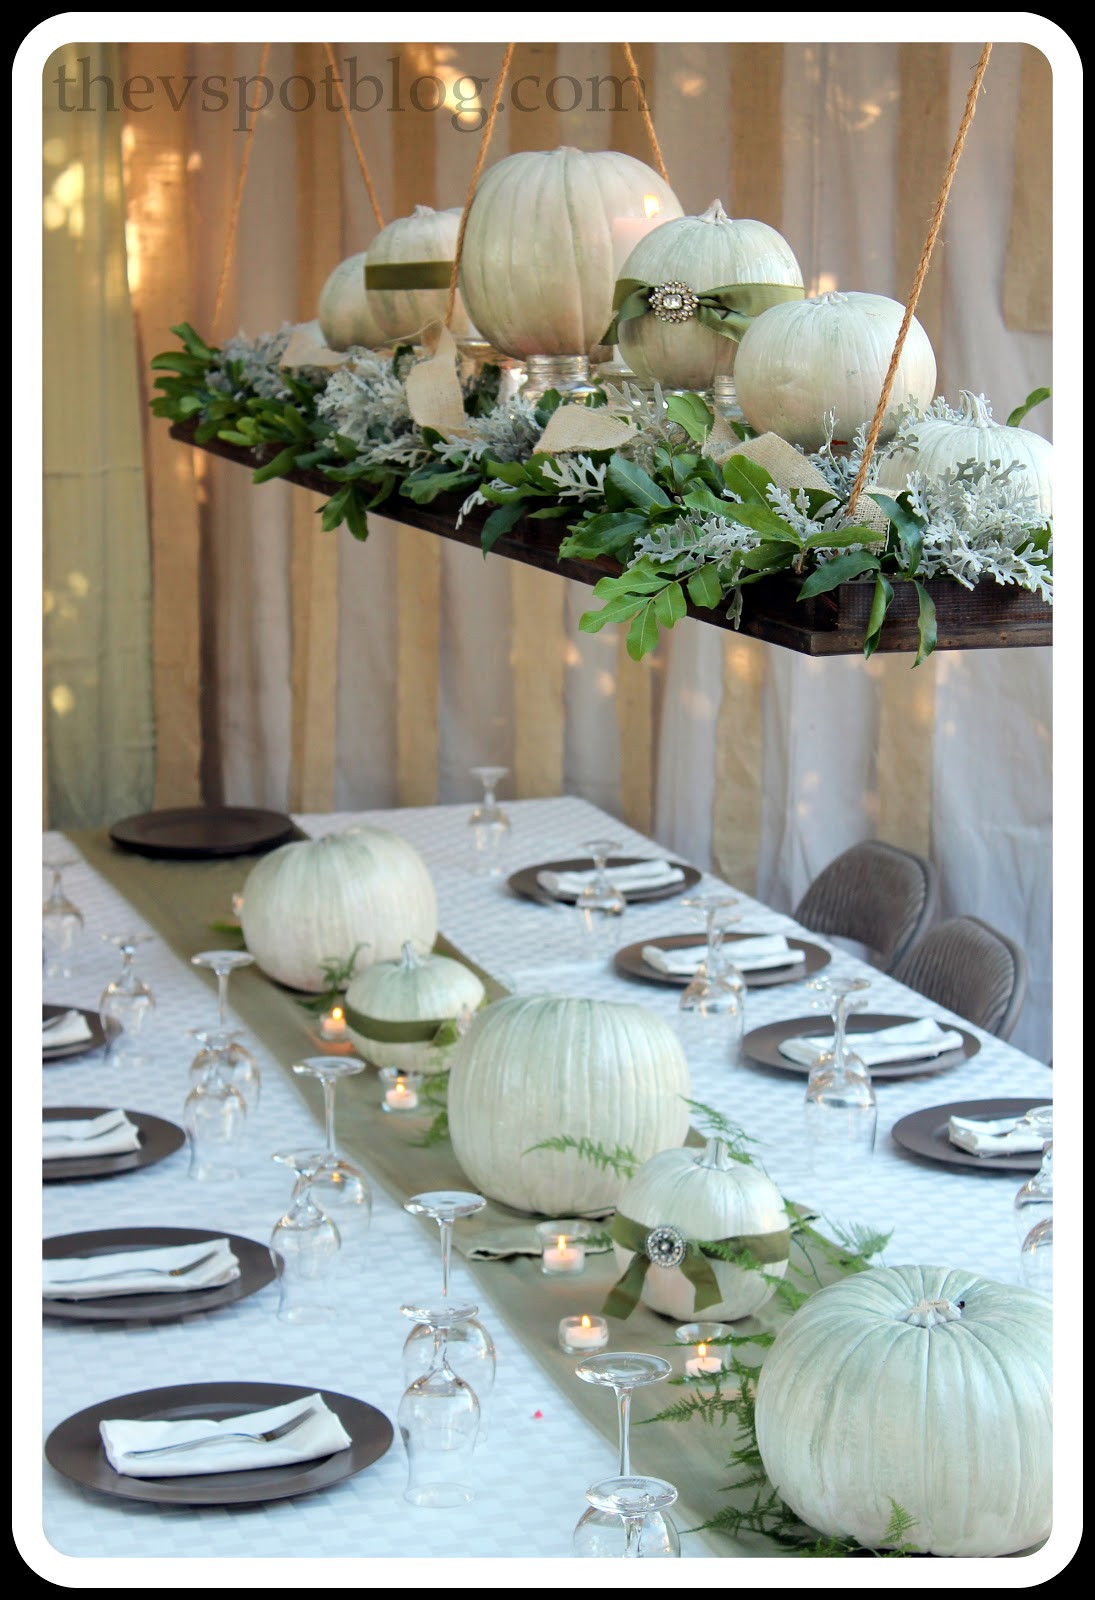 Thanksgiving Table Decorating Ideas
 Thanksgiving Wrap Up Dinner Decor and the Thanksgiving